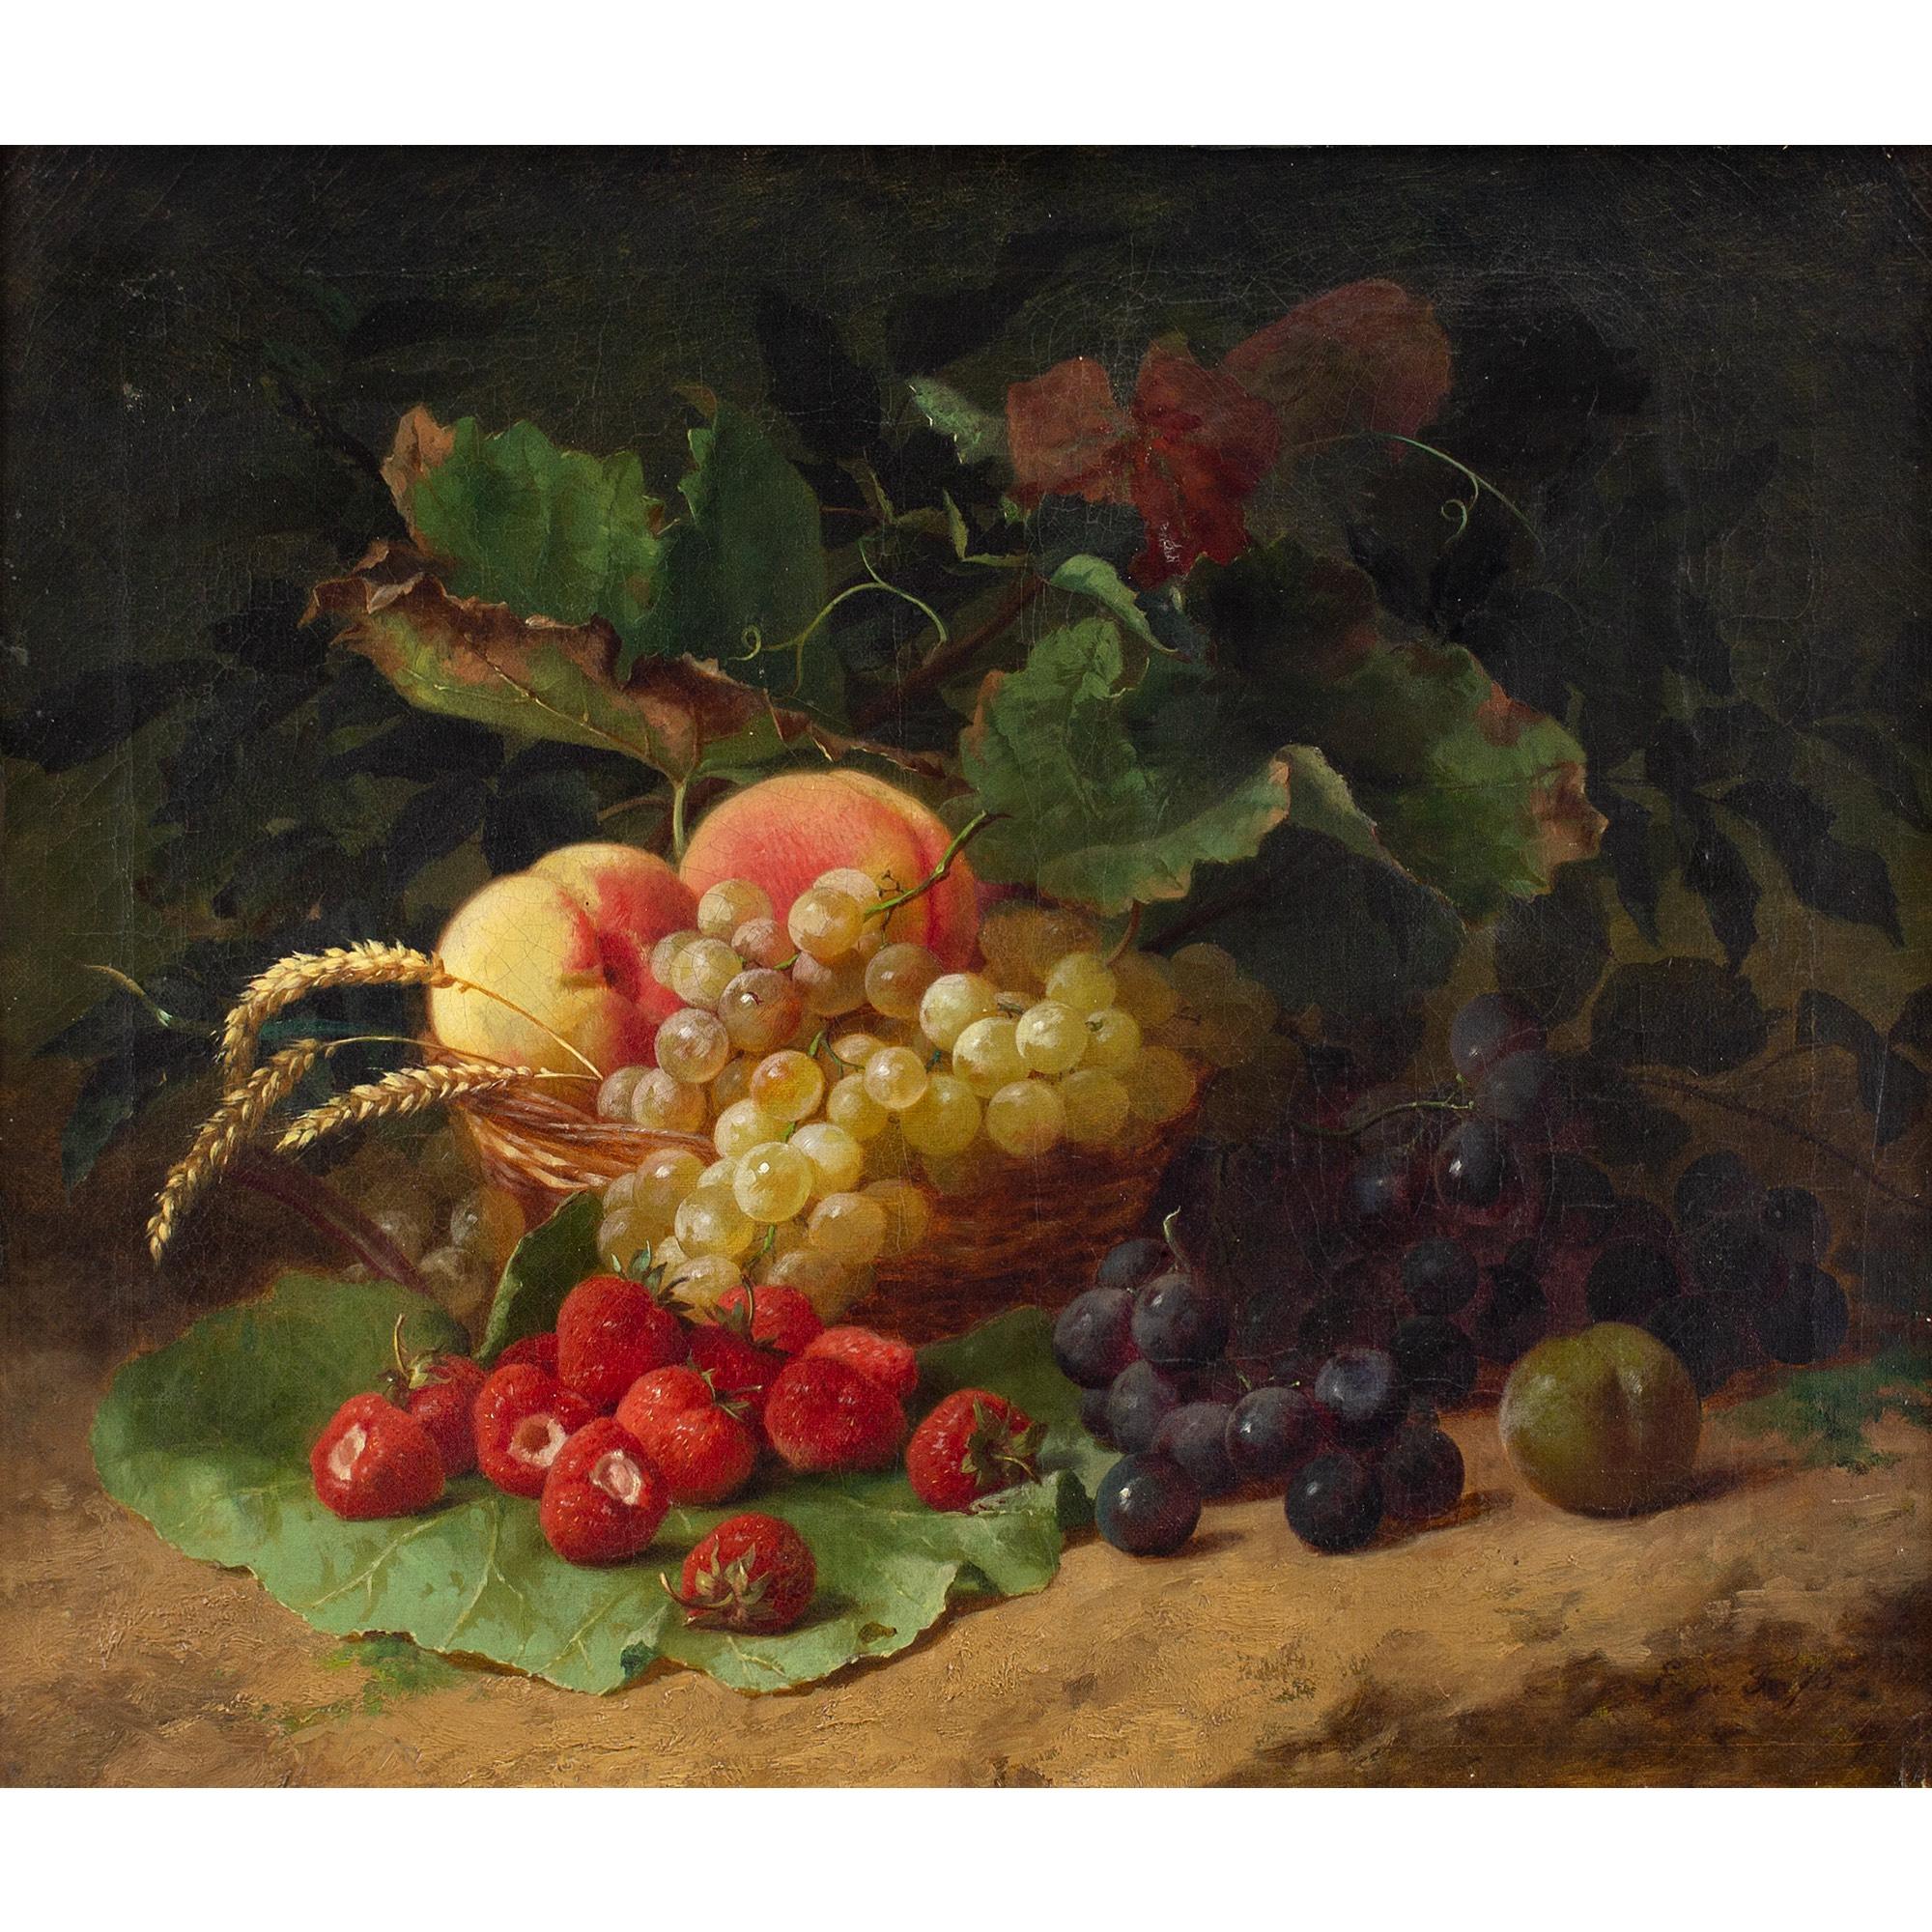 This 19th-century oil painting by French artist Edouard Fleury (act. 1863-1900) depicts a still life with a basket of fruit.

During the mid-19th century, when Fleury undertook his formal education in Paris, still life painters sought inspiration